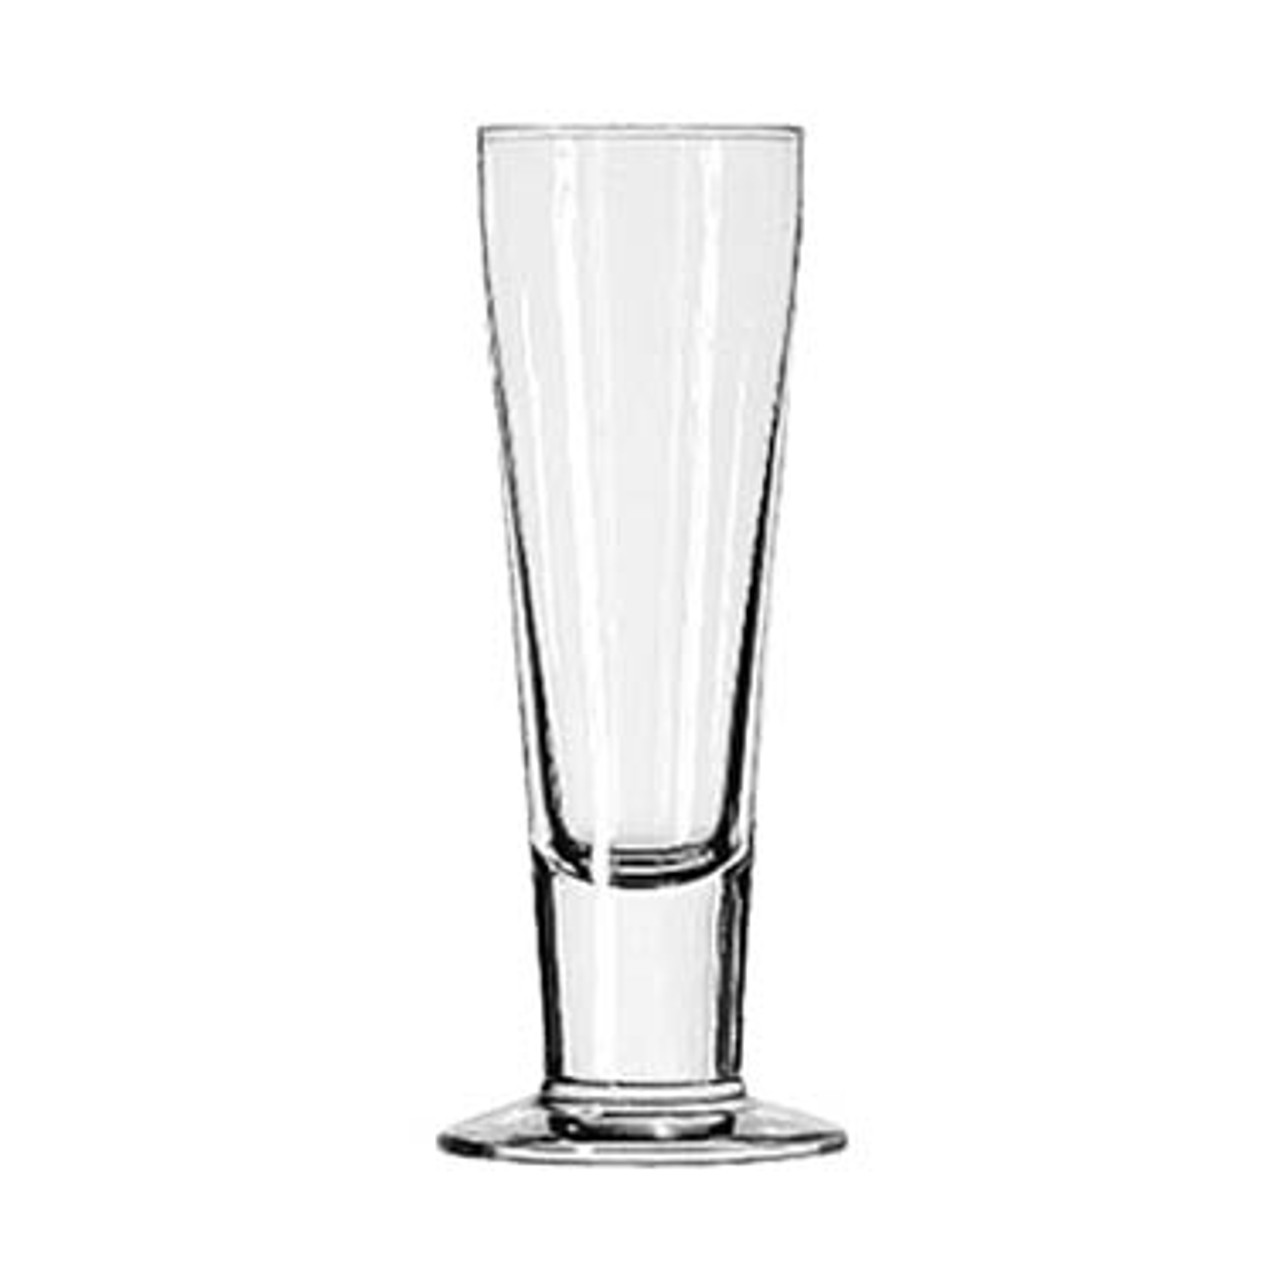 https://cdn11.bigcommerce.com/s-g3i86bef61/images/stencil/1280x1280/products/1151/4246/Libbey-3826-Cordial-Glass__68633.1667502424.jpg?c=1